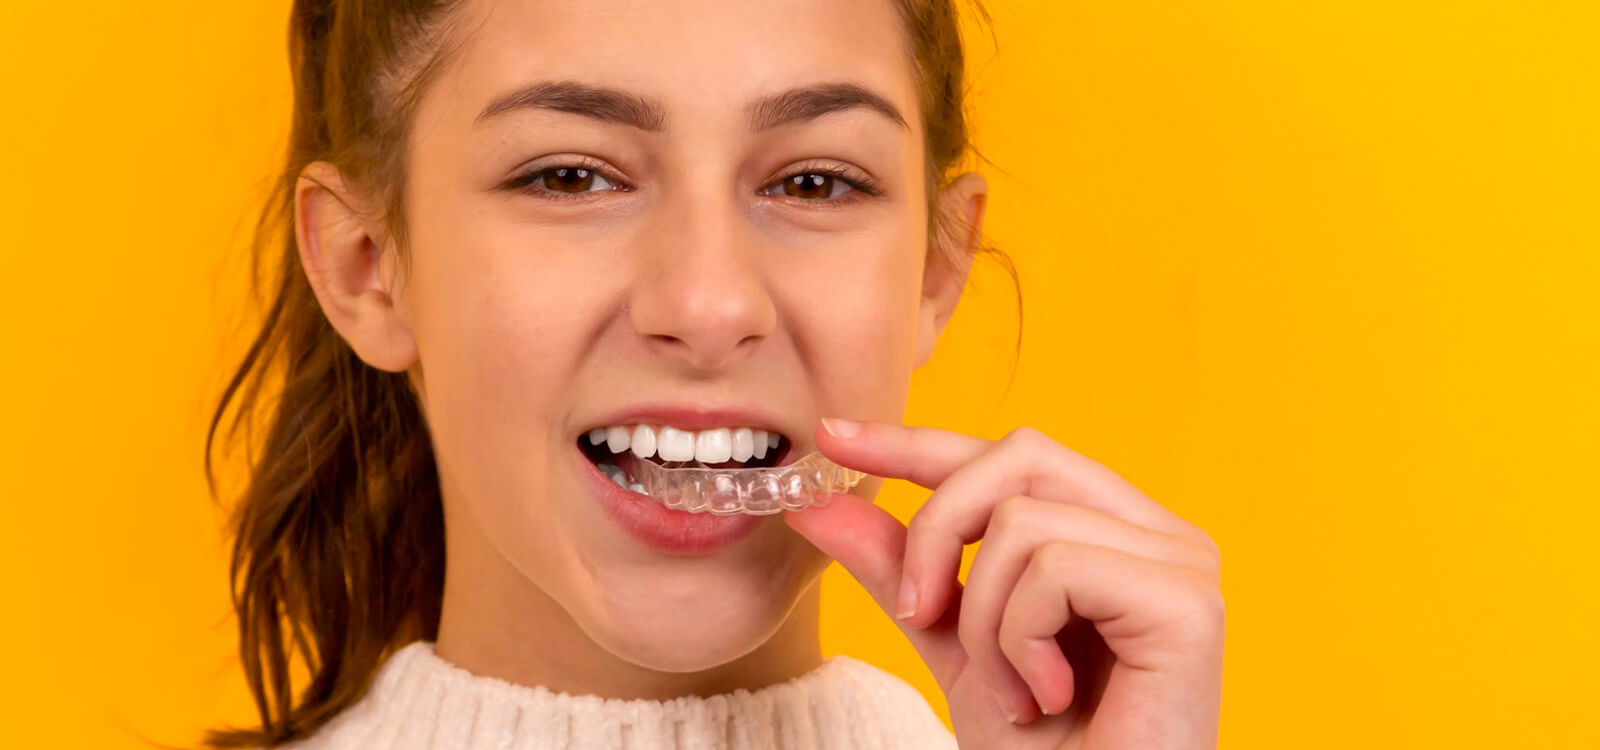 teen holds aligner to teeth and learns Invisalign tips